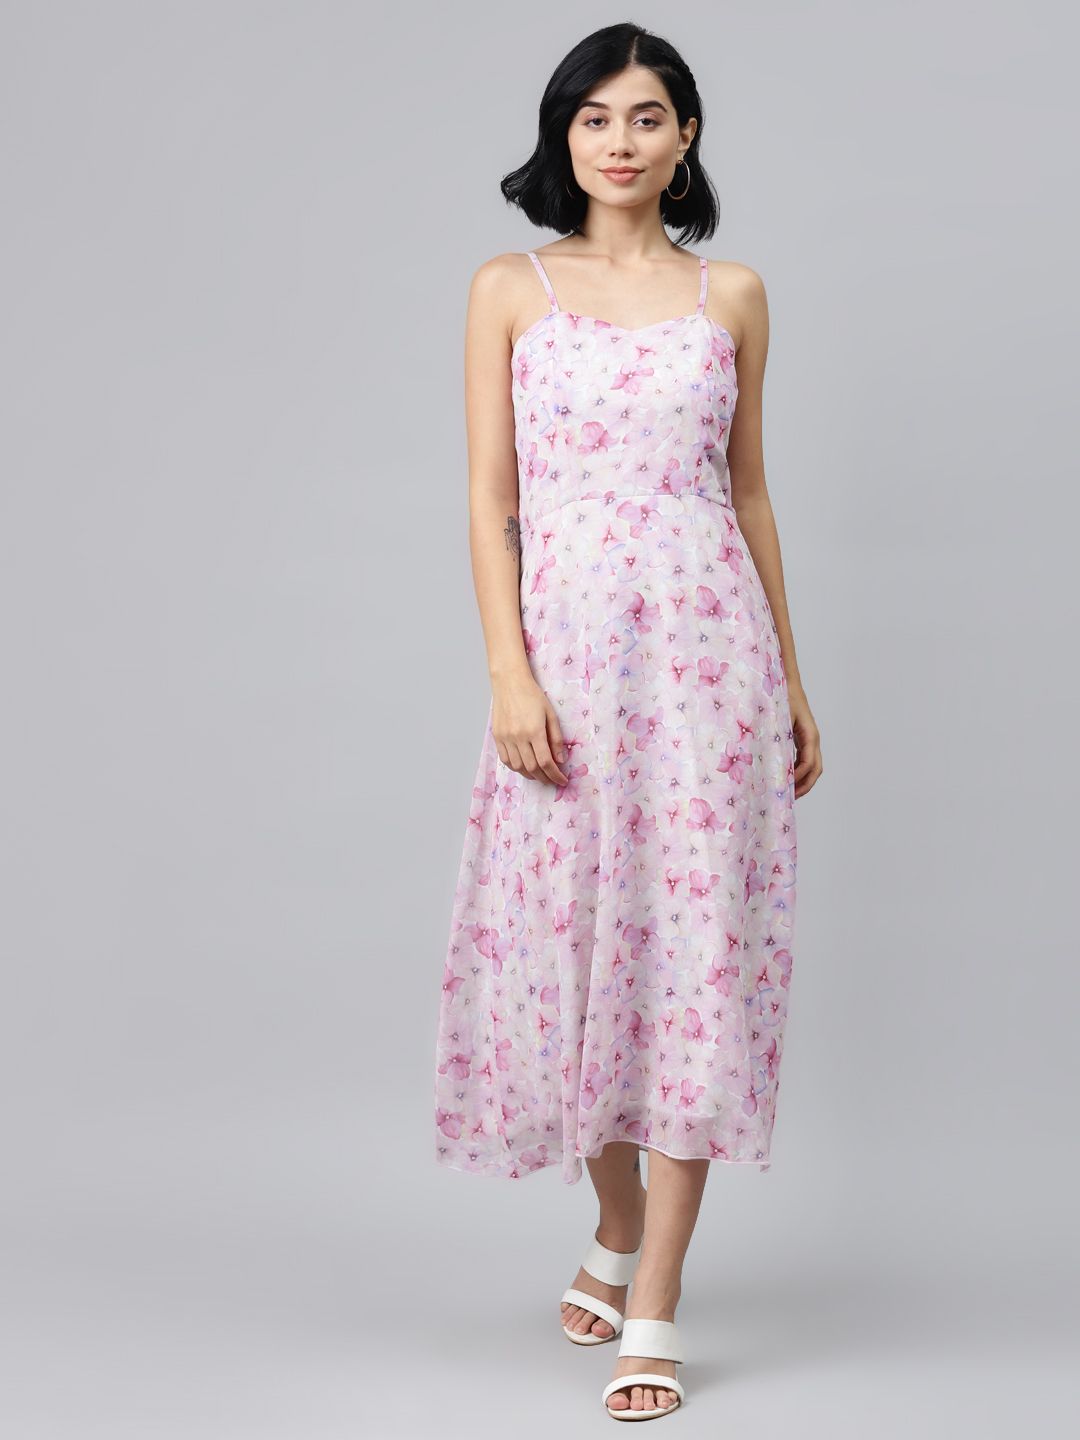 SASSAFRAS Pink & Off-White Floral Print Smocked A-Line Dress Price in India